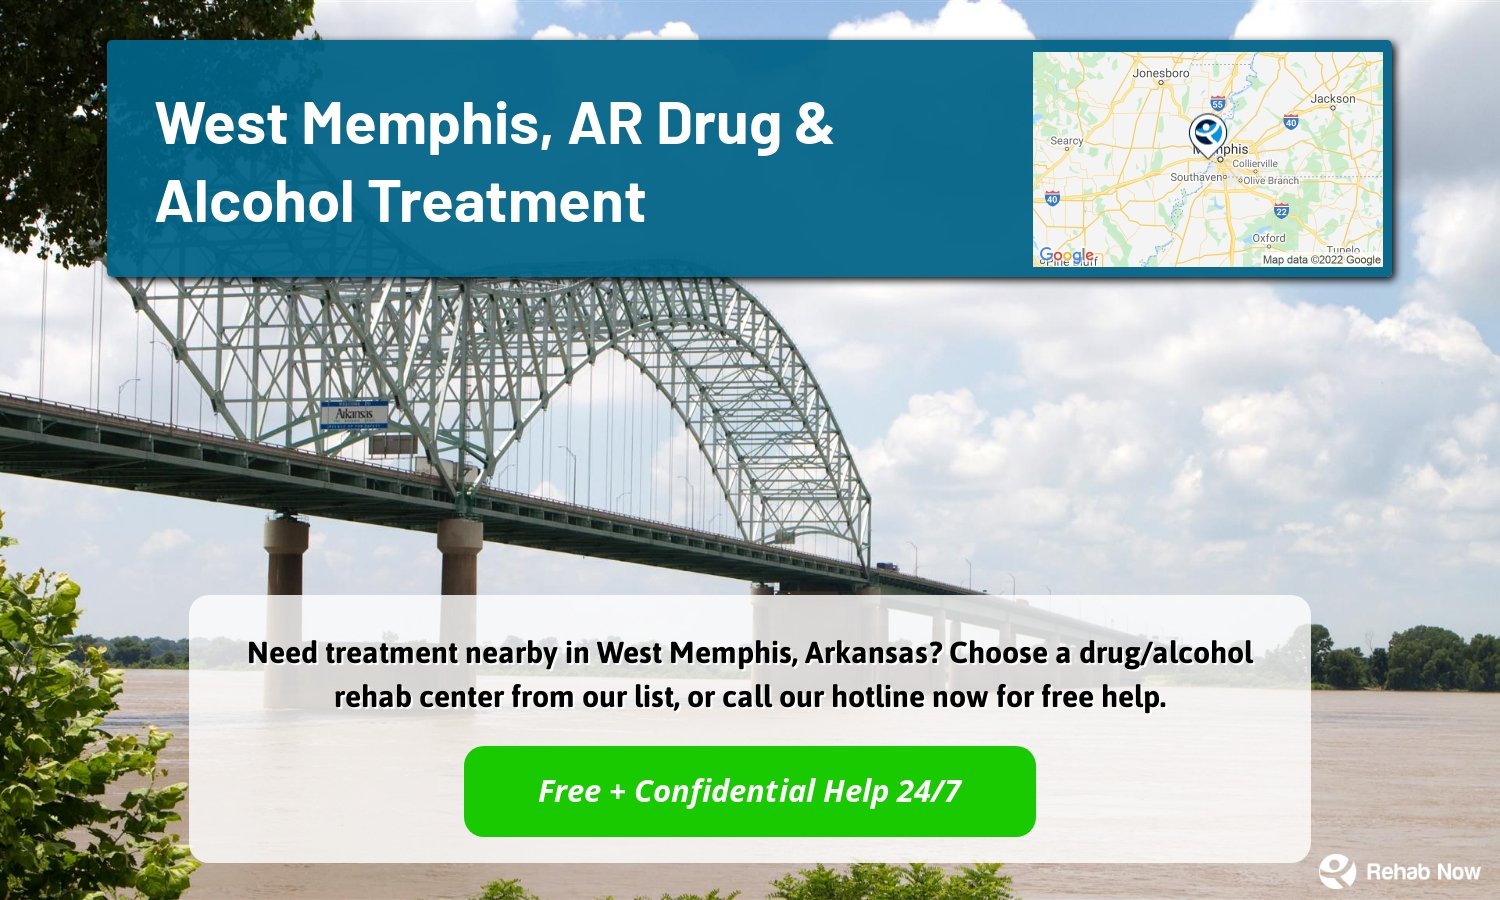 Need treatment nearby in West Memphis, Arkansas? Choose a drug/alcohol rehab center from our list, or call our hotline now for free help.